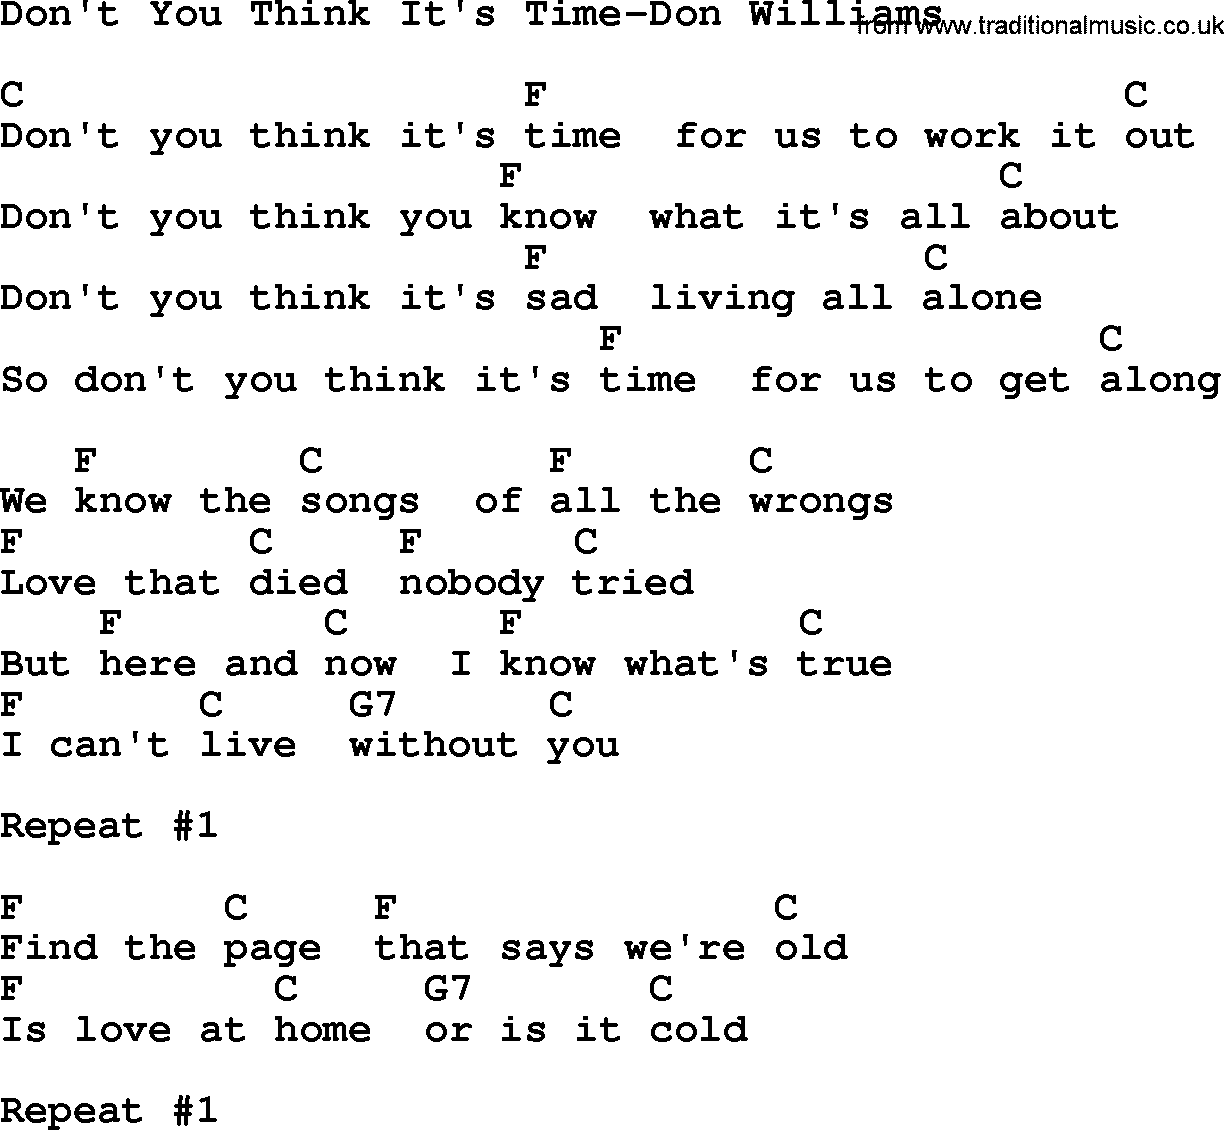 Country music song: Don't You Think It's Time-Don Williams lyrics and chords